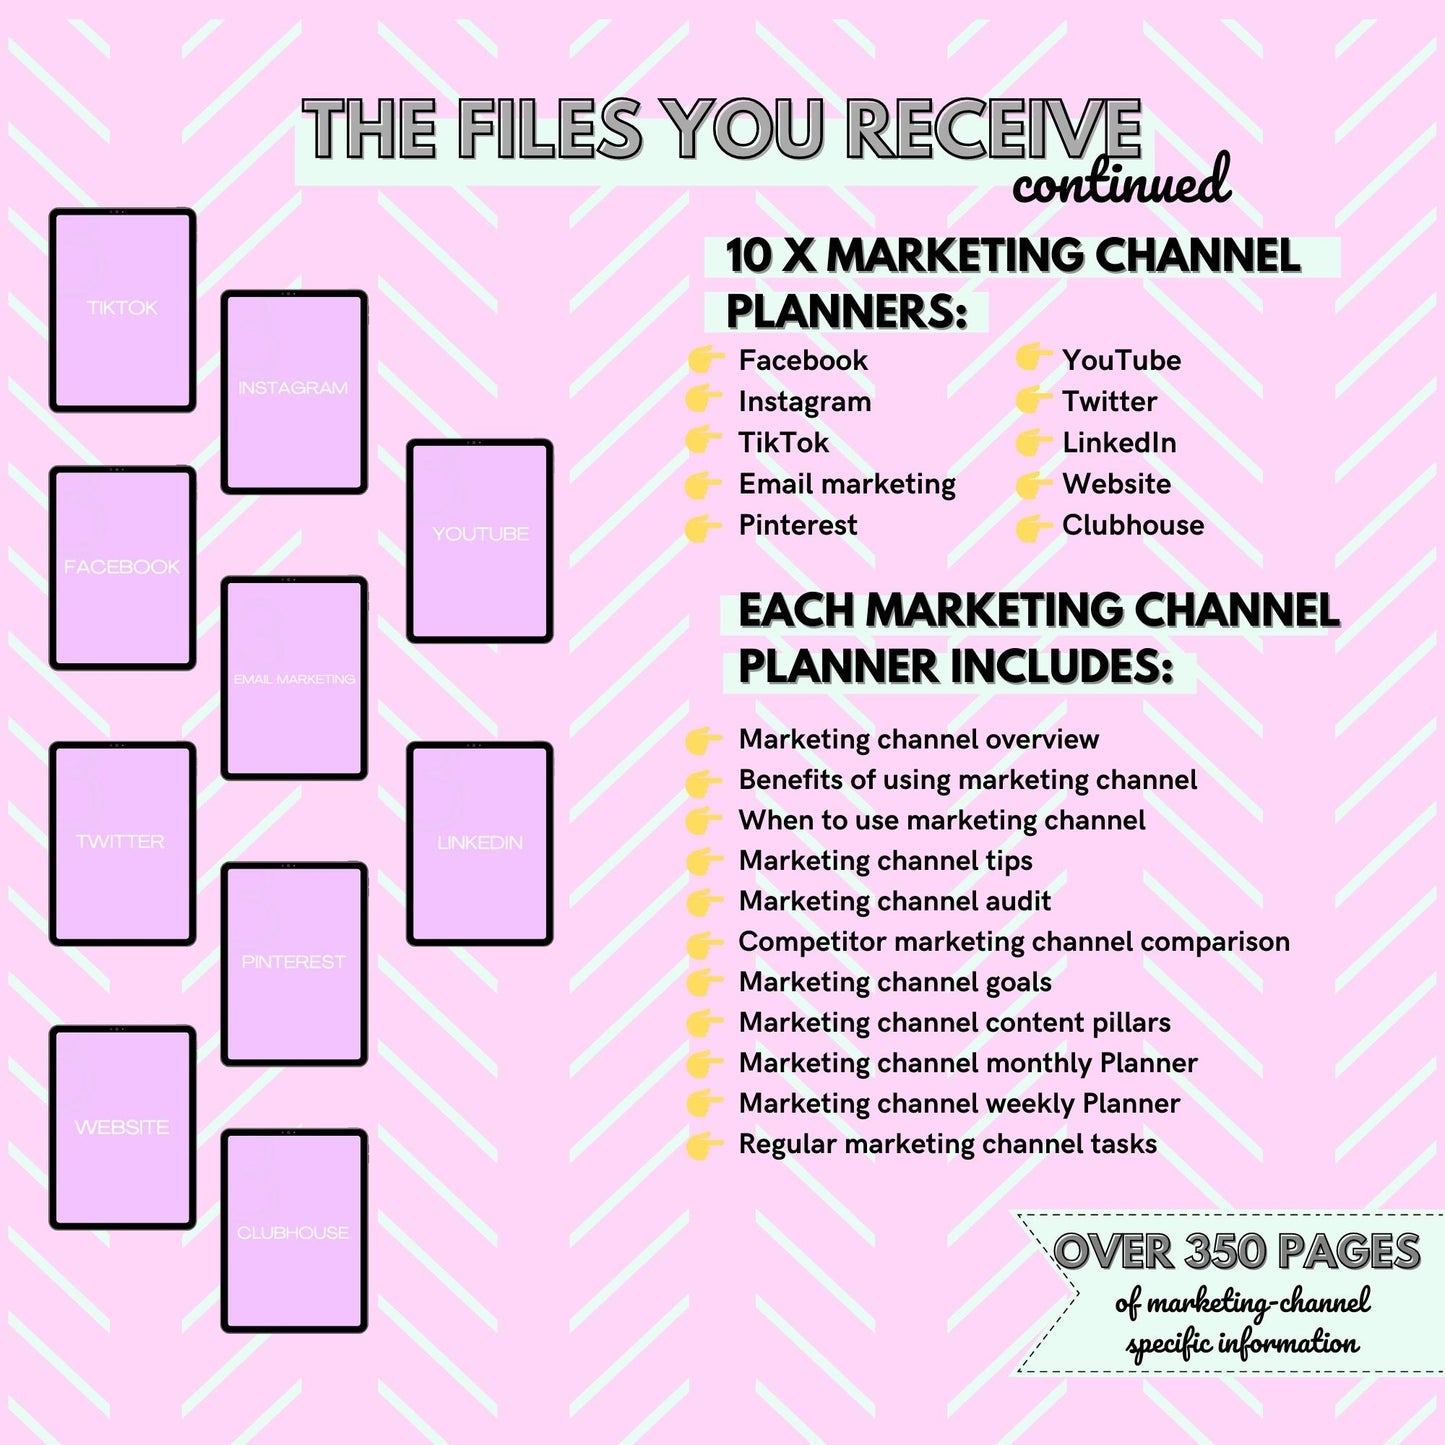 2023 Content Marketing Planner - A4 Size - Instant download